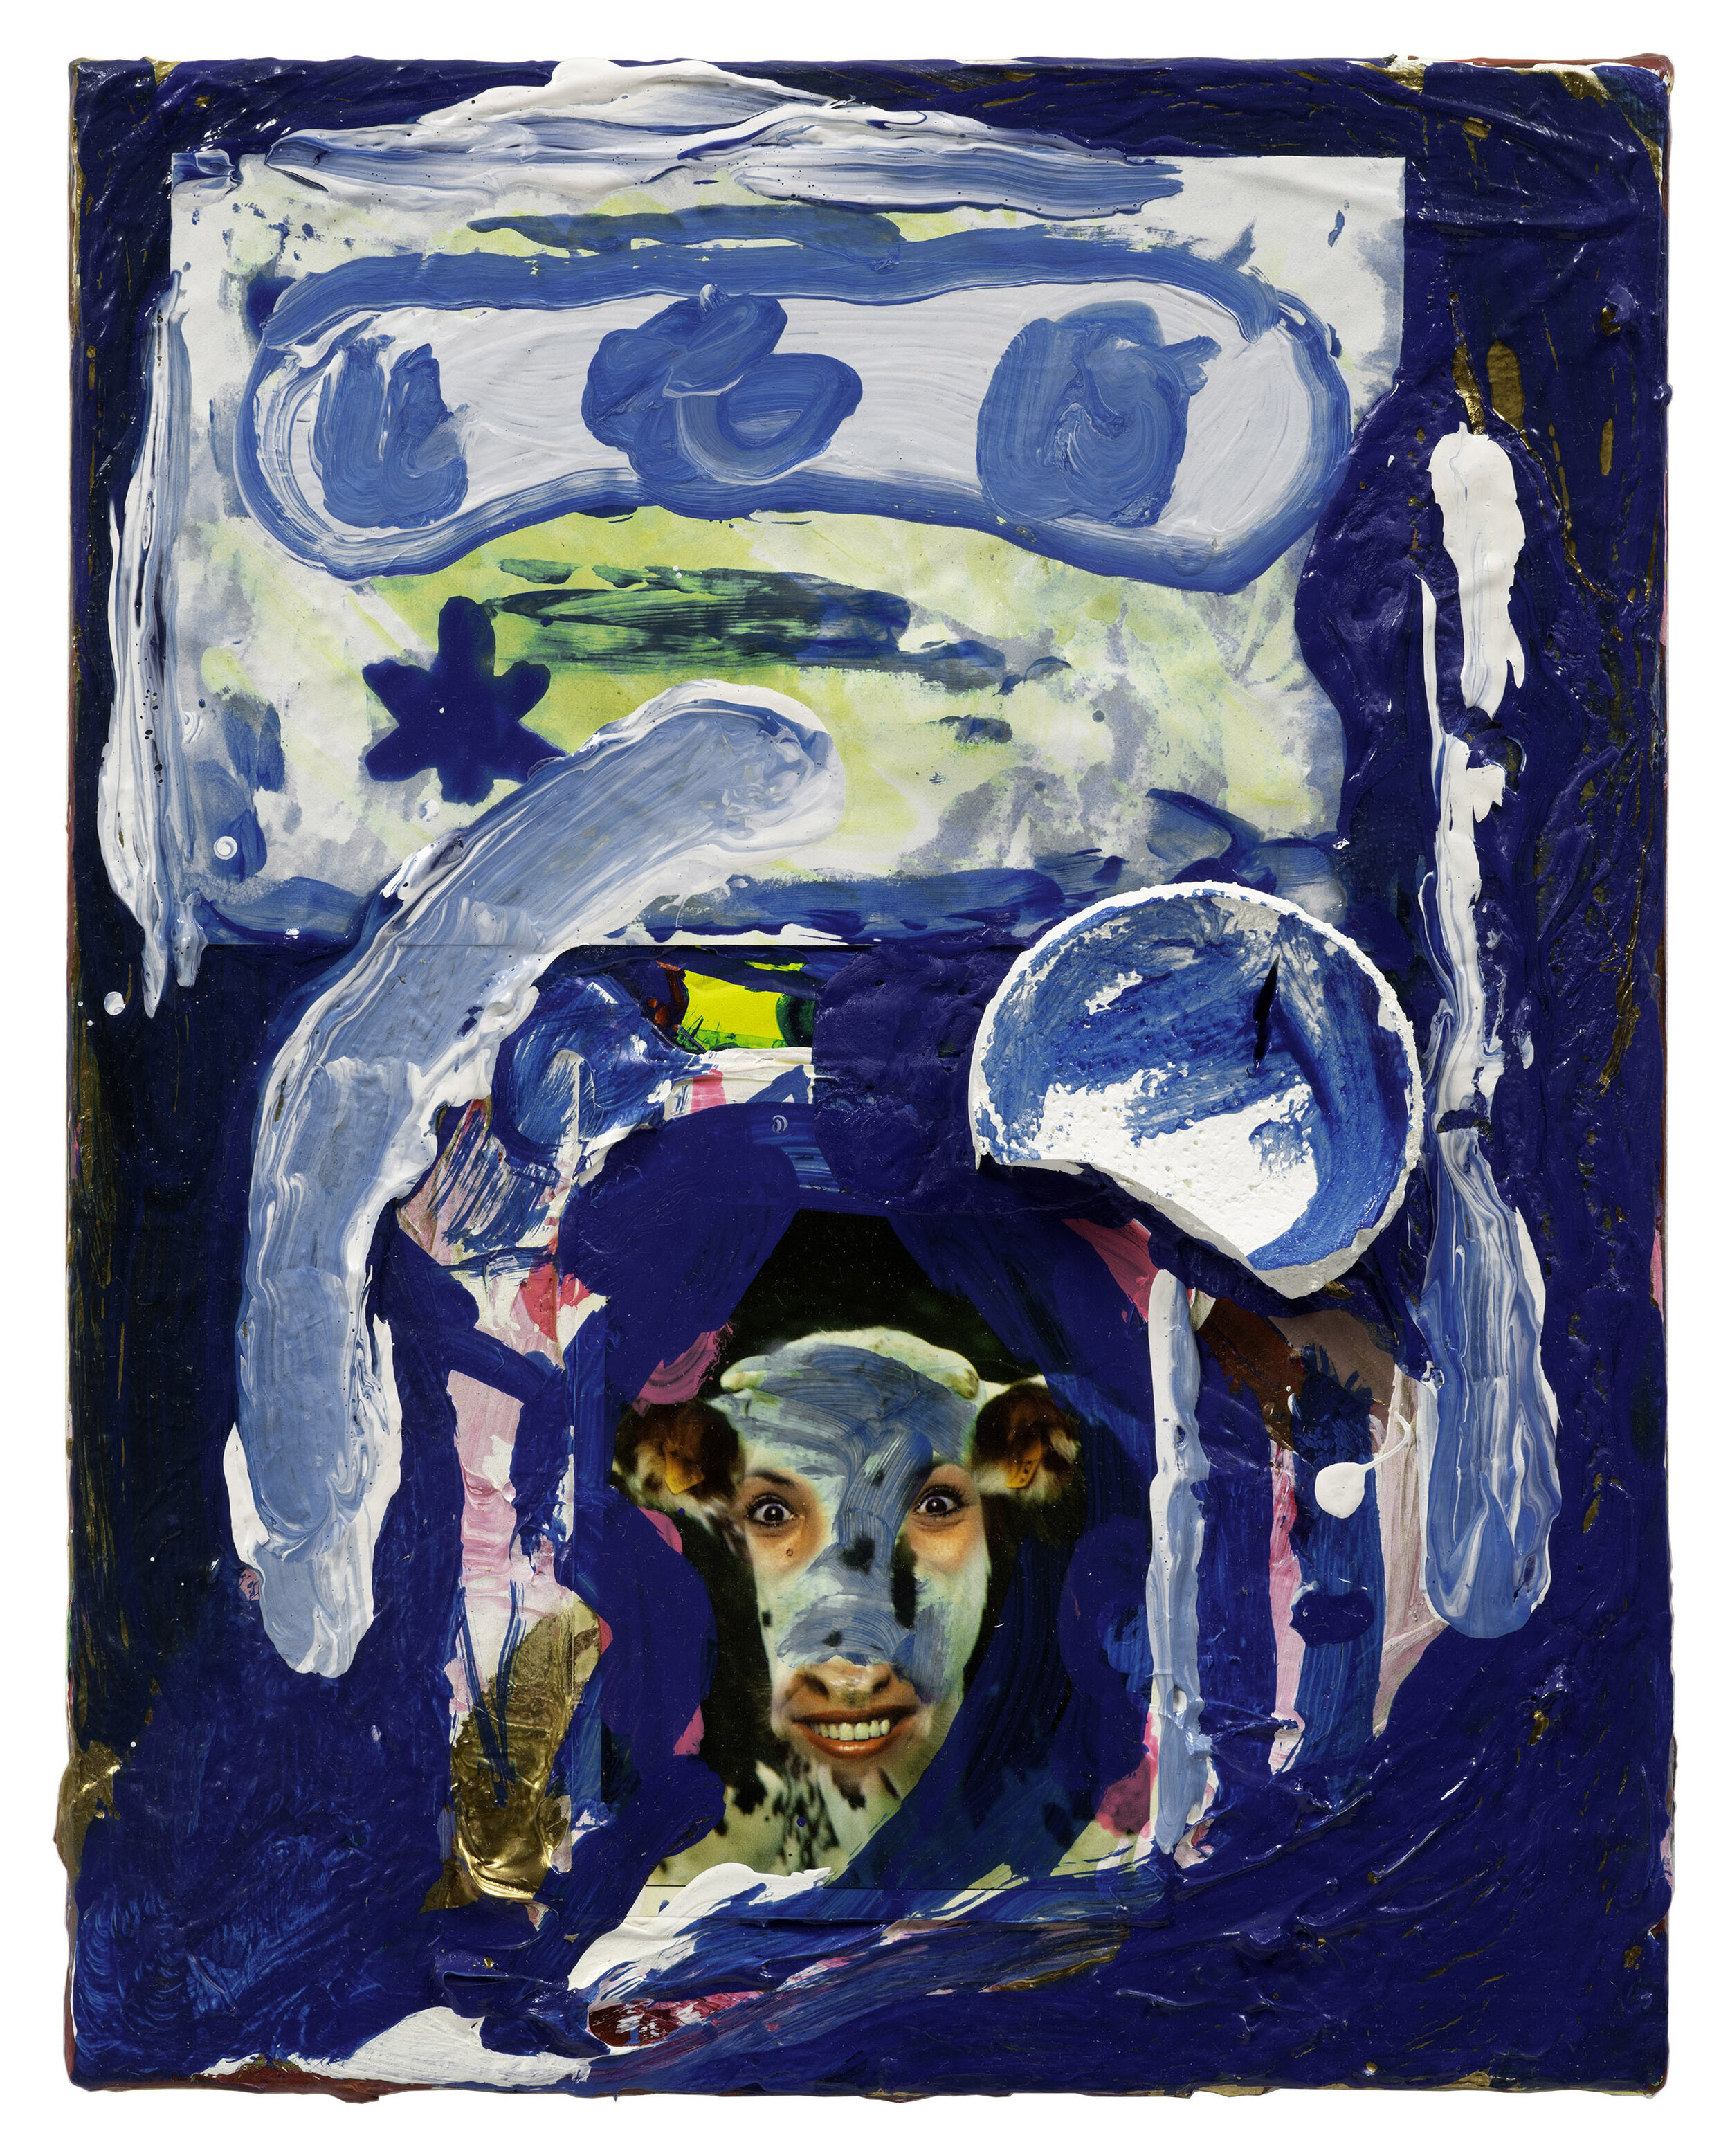  Drew Beattie  Luke the Cow   2020 acrylic and collage on canvas 14 x 11 inches 